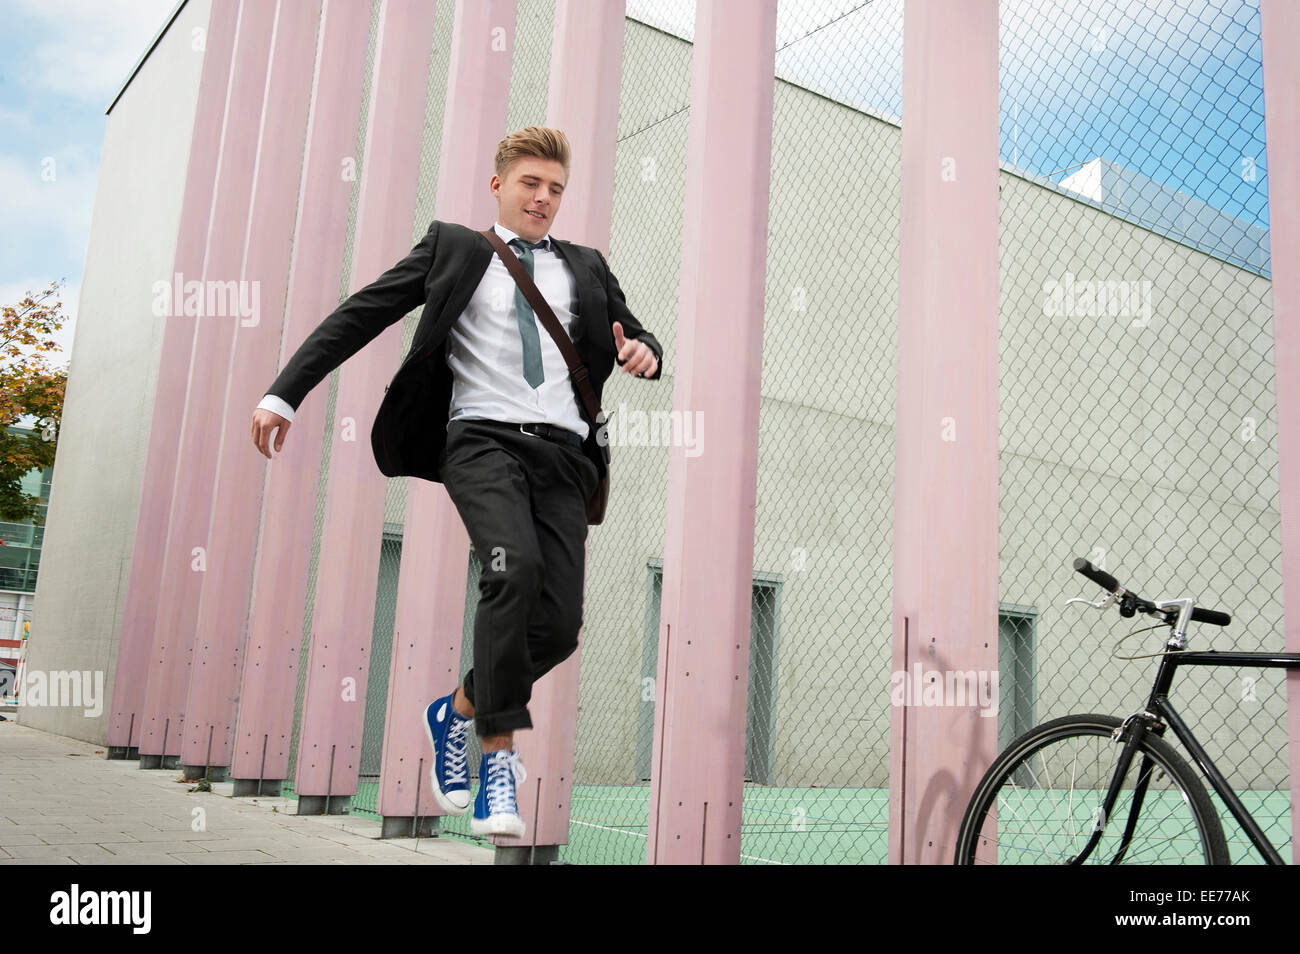 Young businessman jumping in air, Munich, Bavaria, Germany Stock Photo